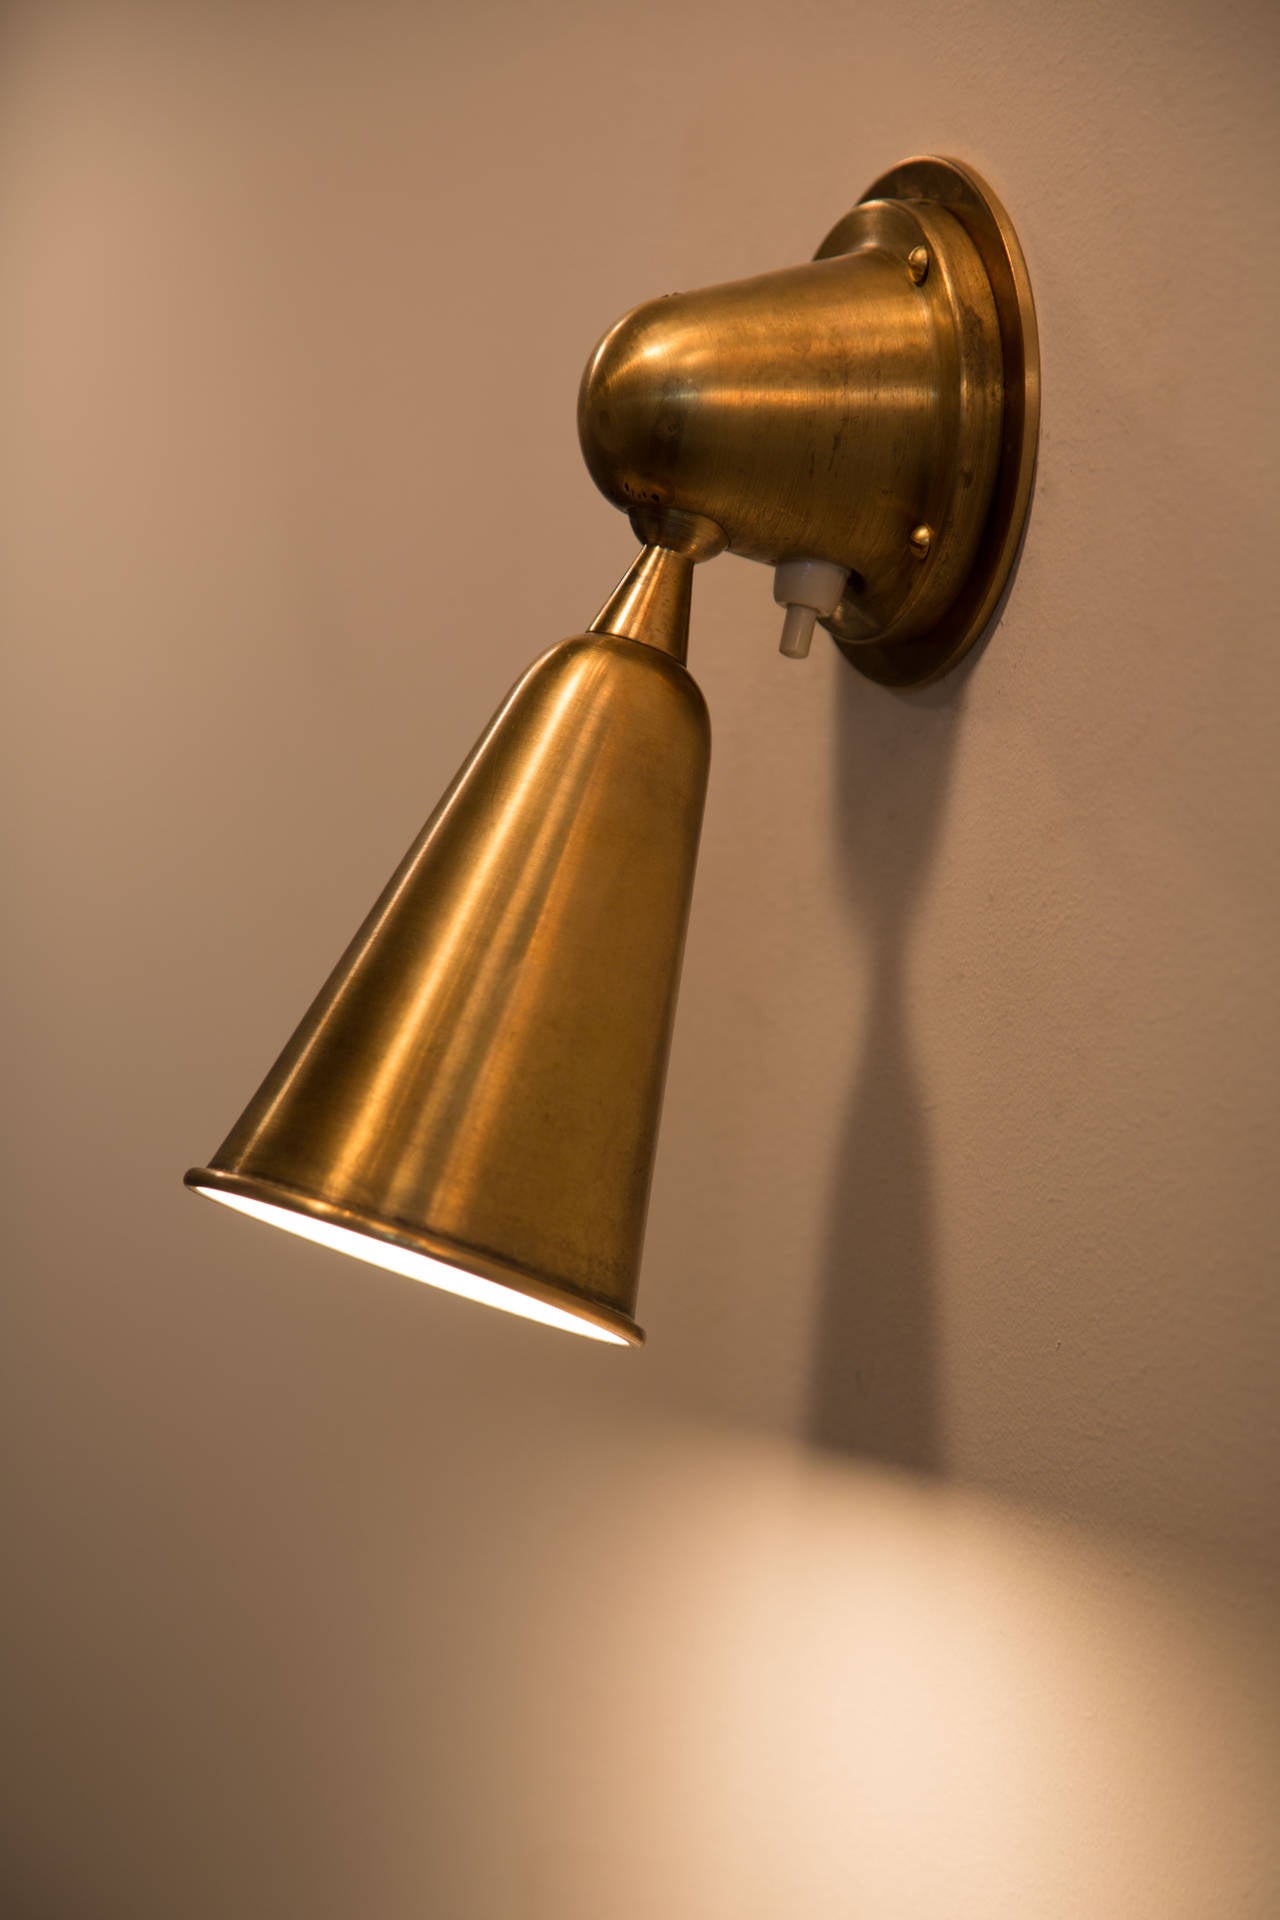 Satin brass sconce with fully pivoting shade.